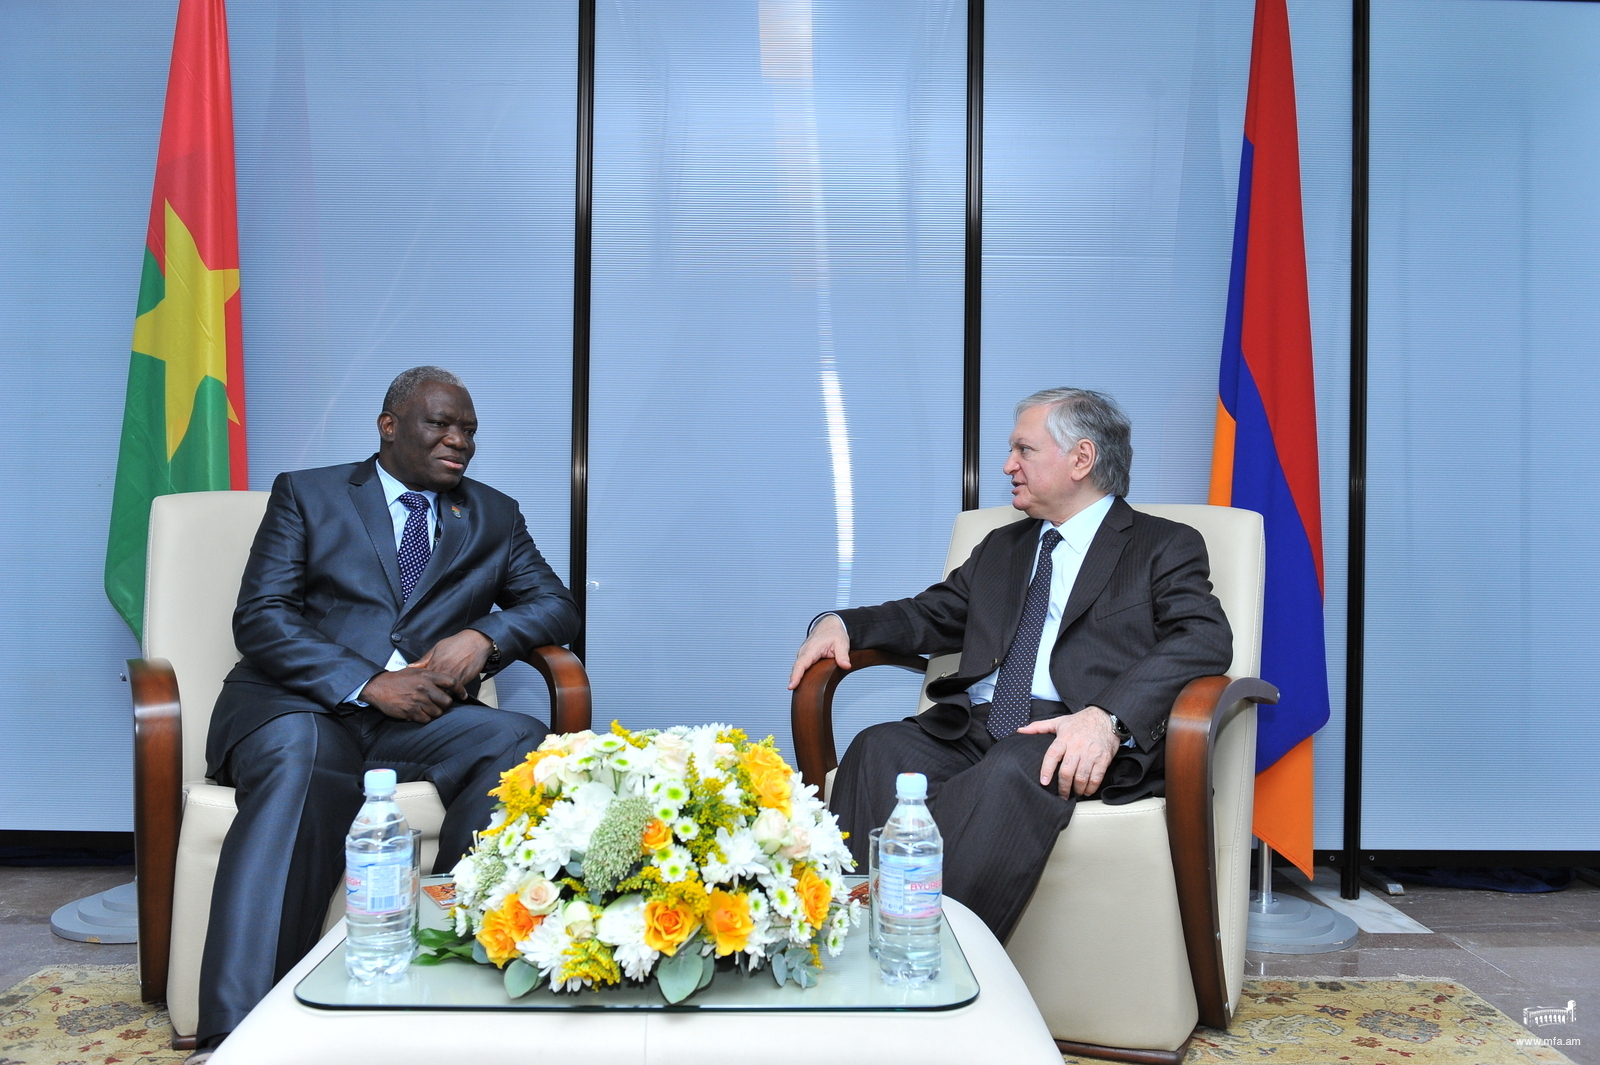 Meeting of Foreign Ministers of Armenia and Burkina Faso